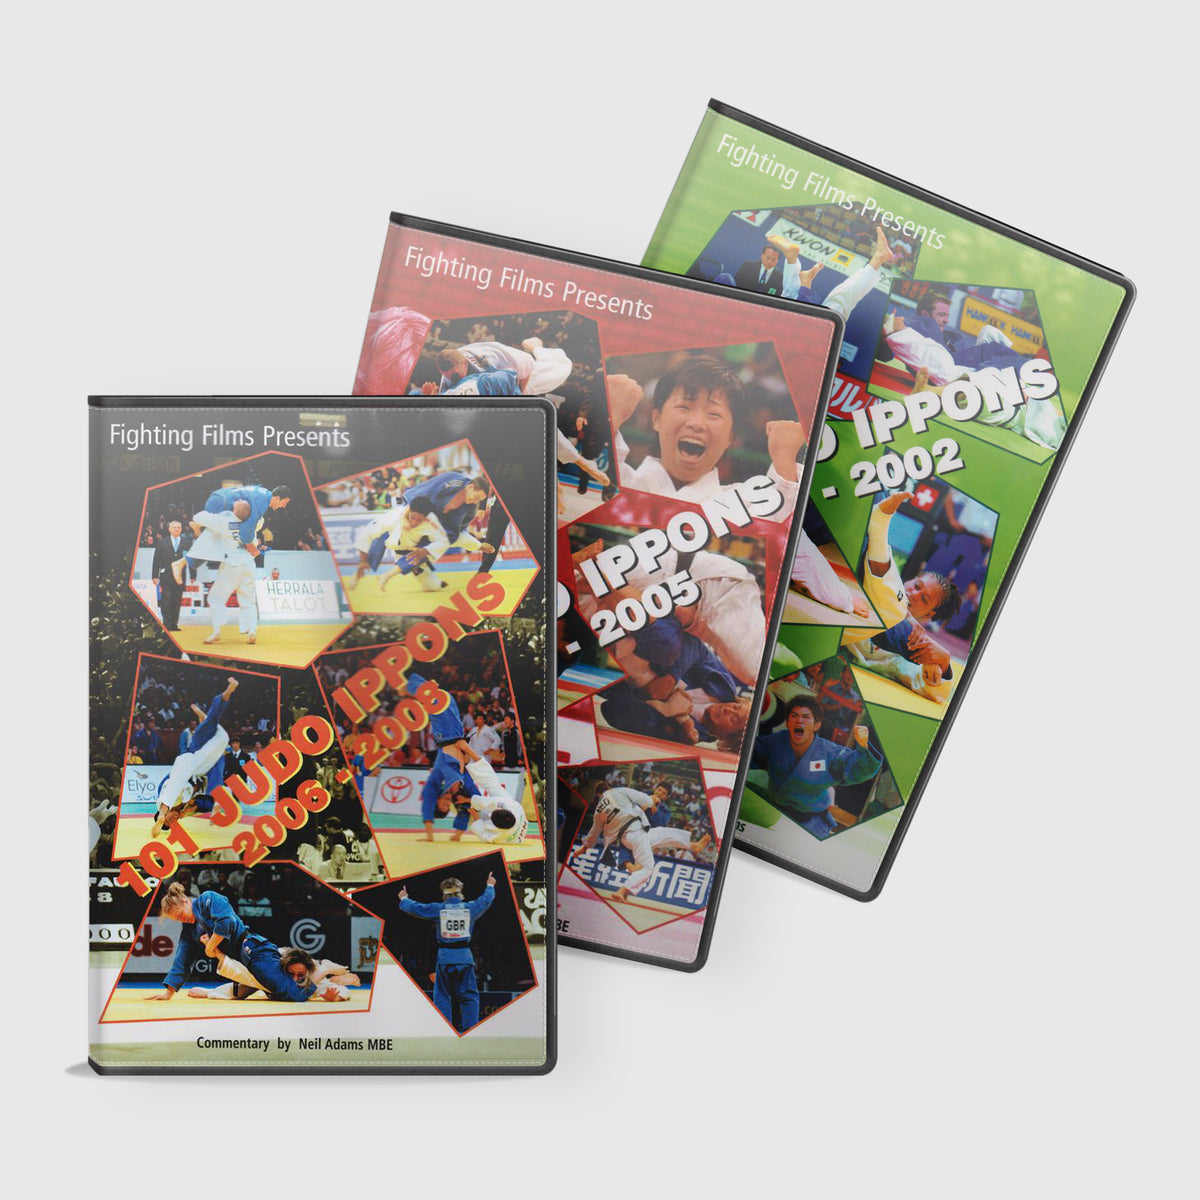 101 Judo Ippons Special 3 DVD Bundle Offer From Fighting Films